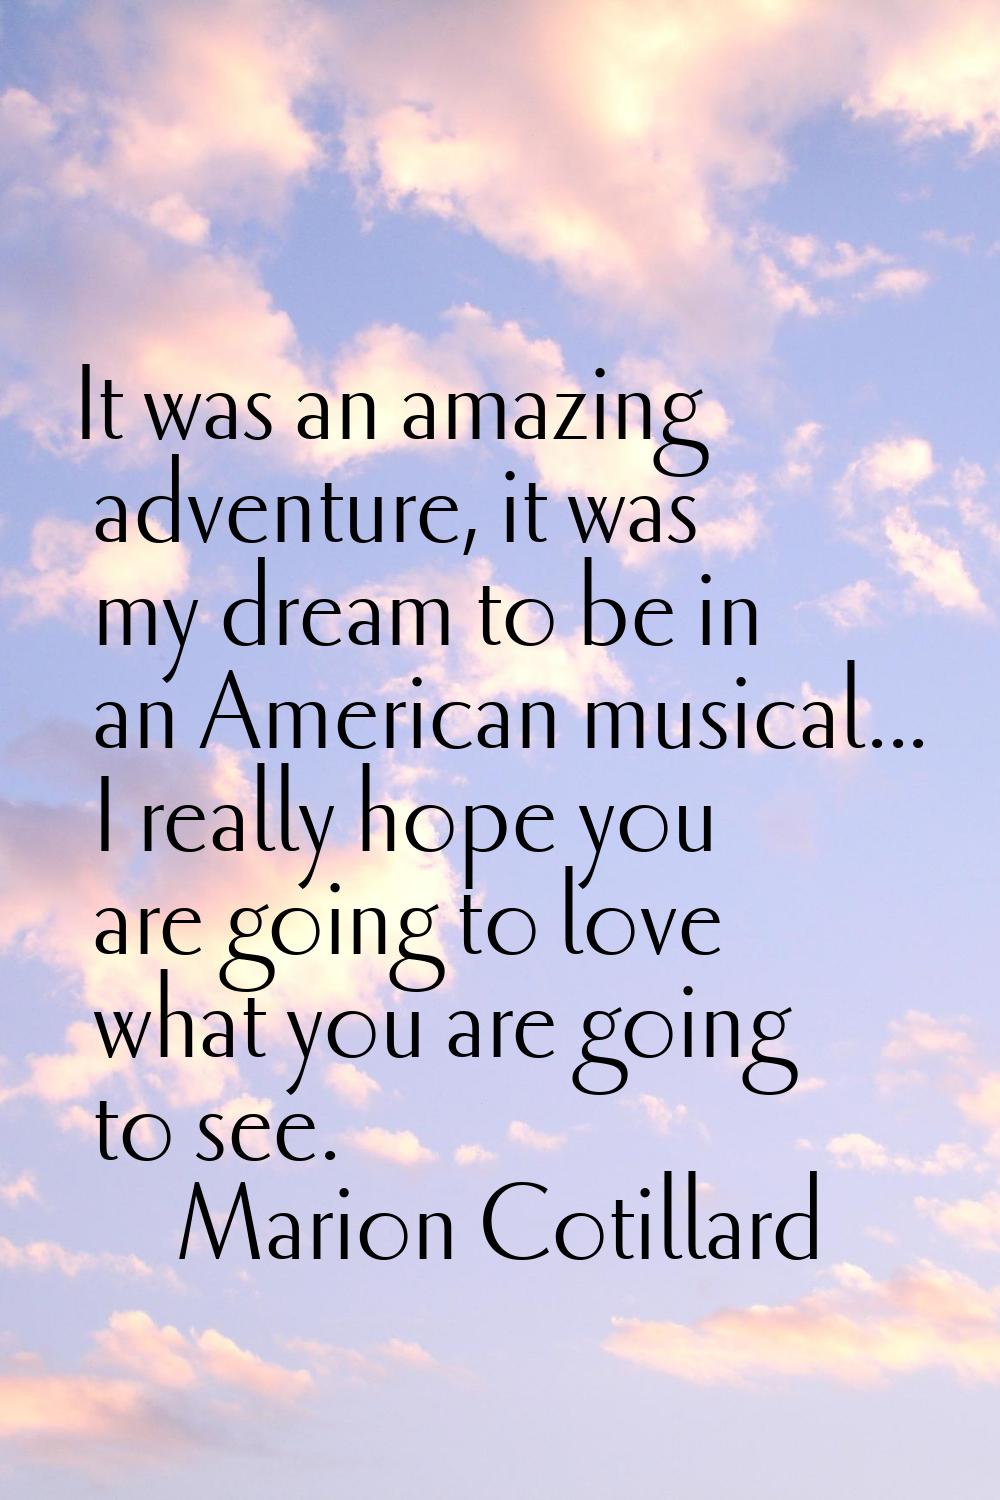 It was an amazing adventure, it was my dream to be in an American musical... I really hope you are 